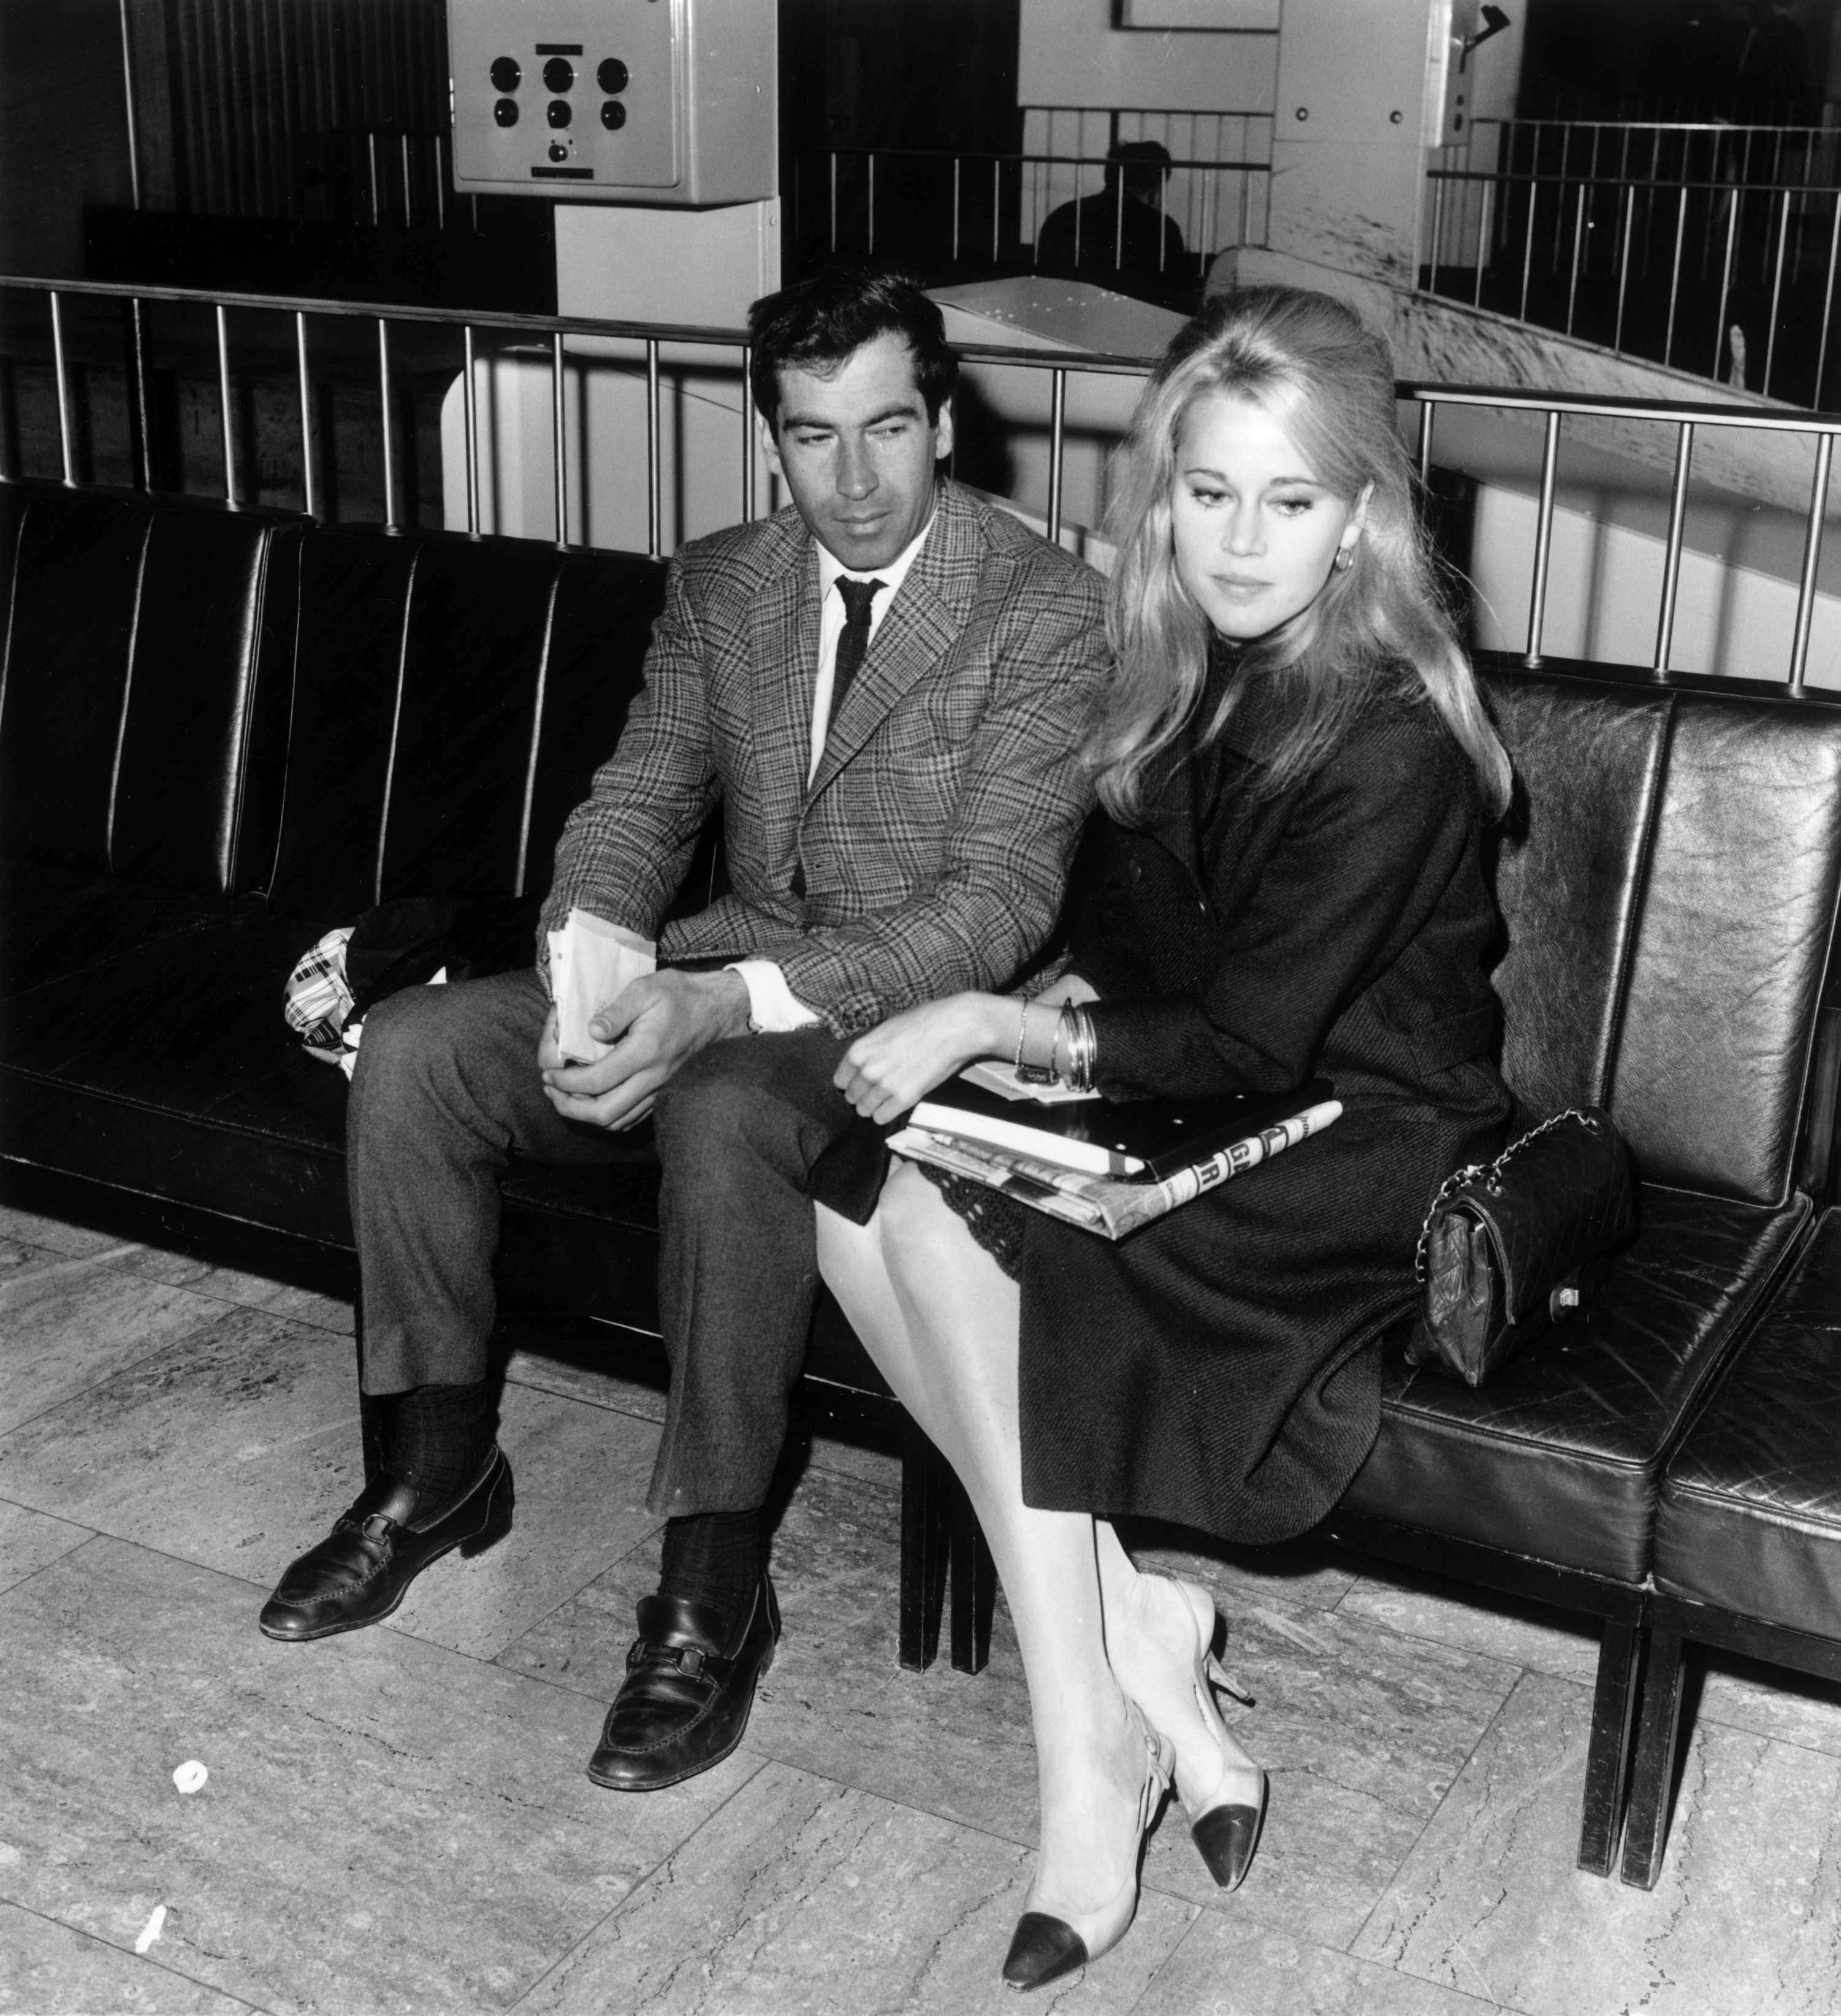 13th October 1965: American actress Jane Fonda with her husband, French film director Roger Vadim (1928 - 2000), at London Airport. (Photo by Evening Standard/Getty Images)